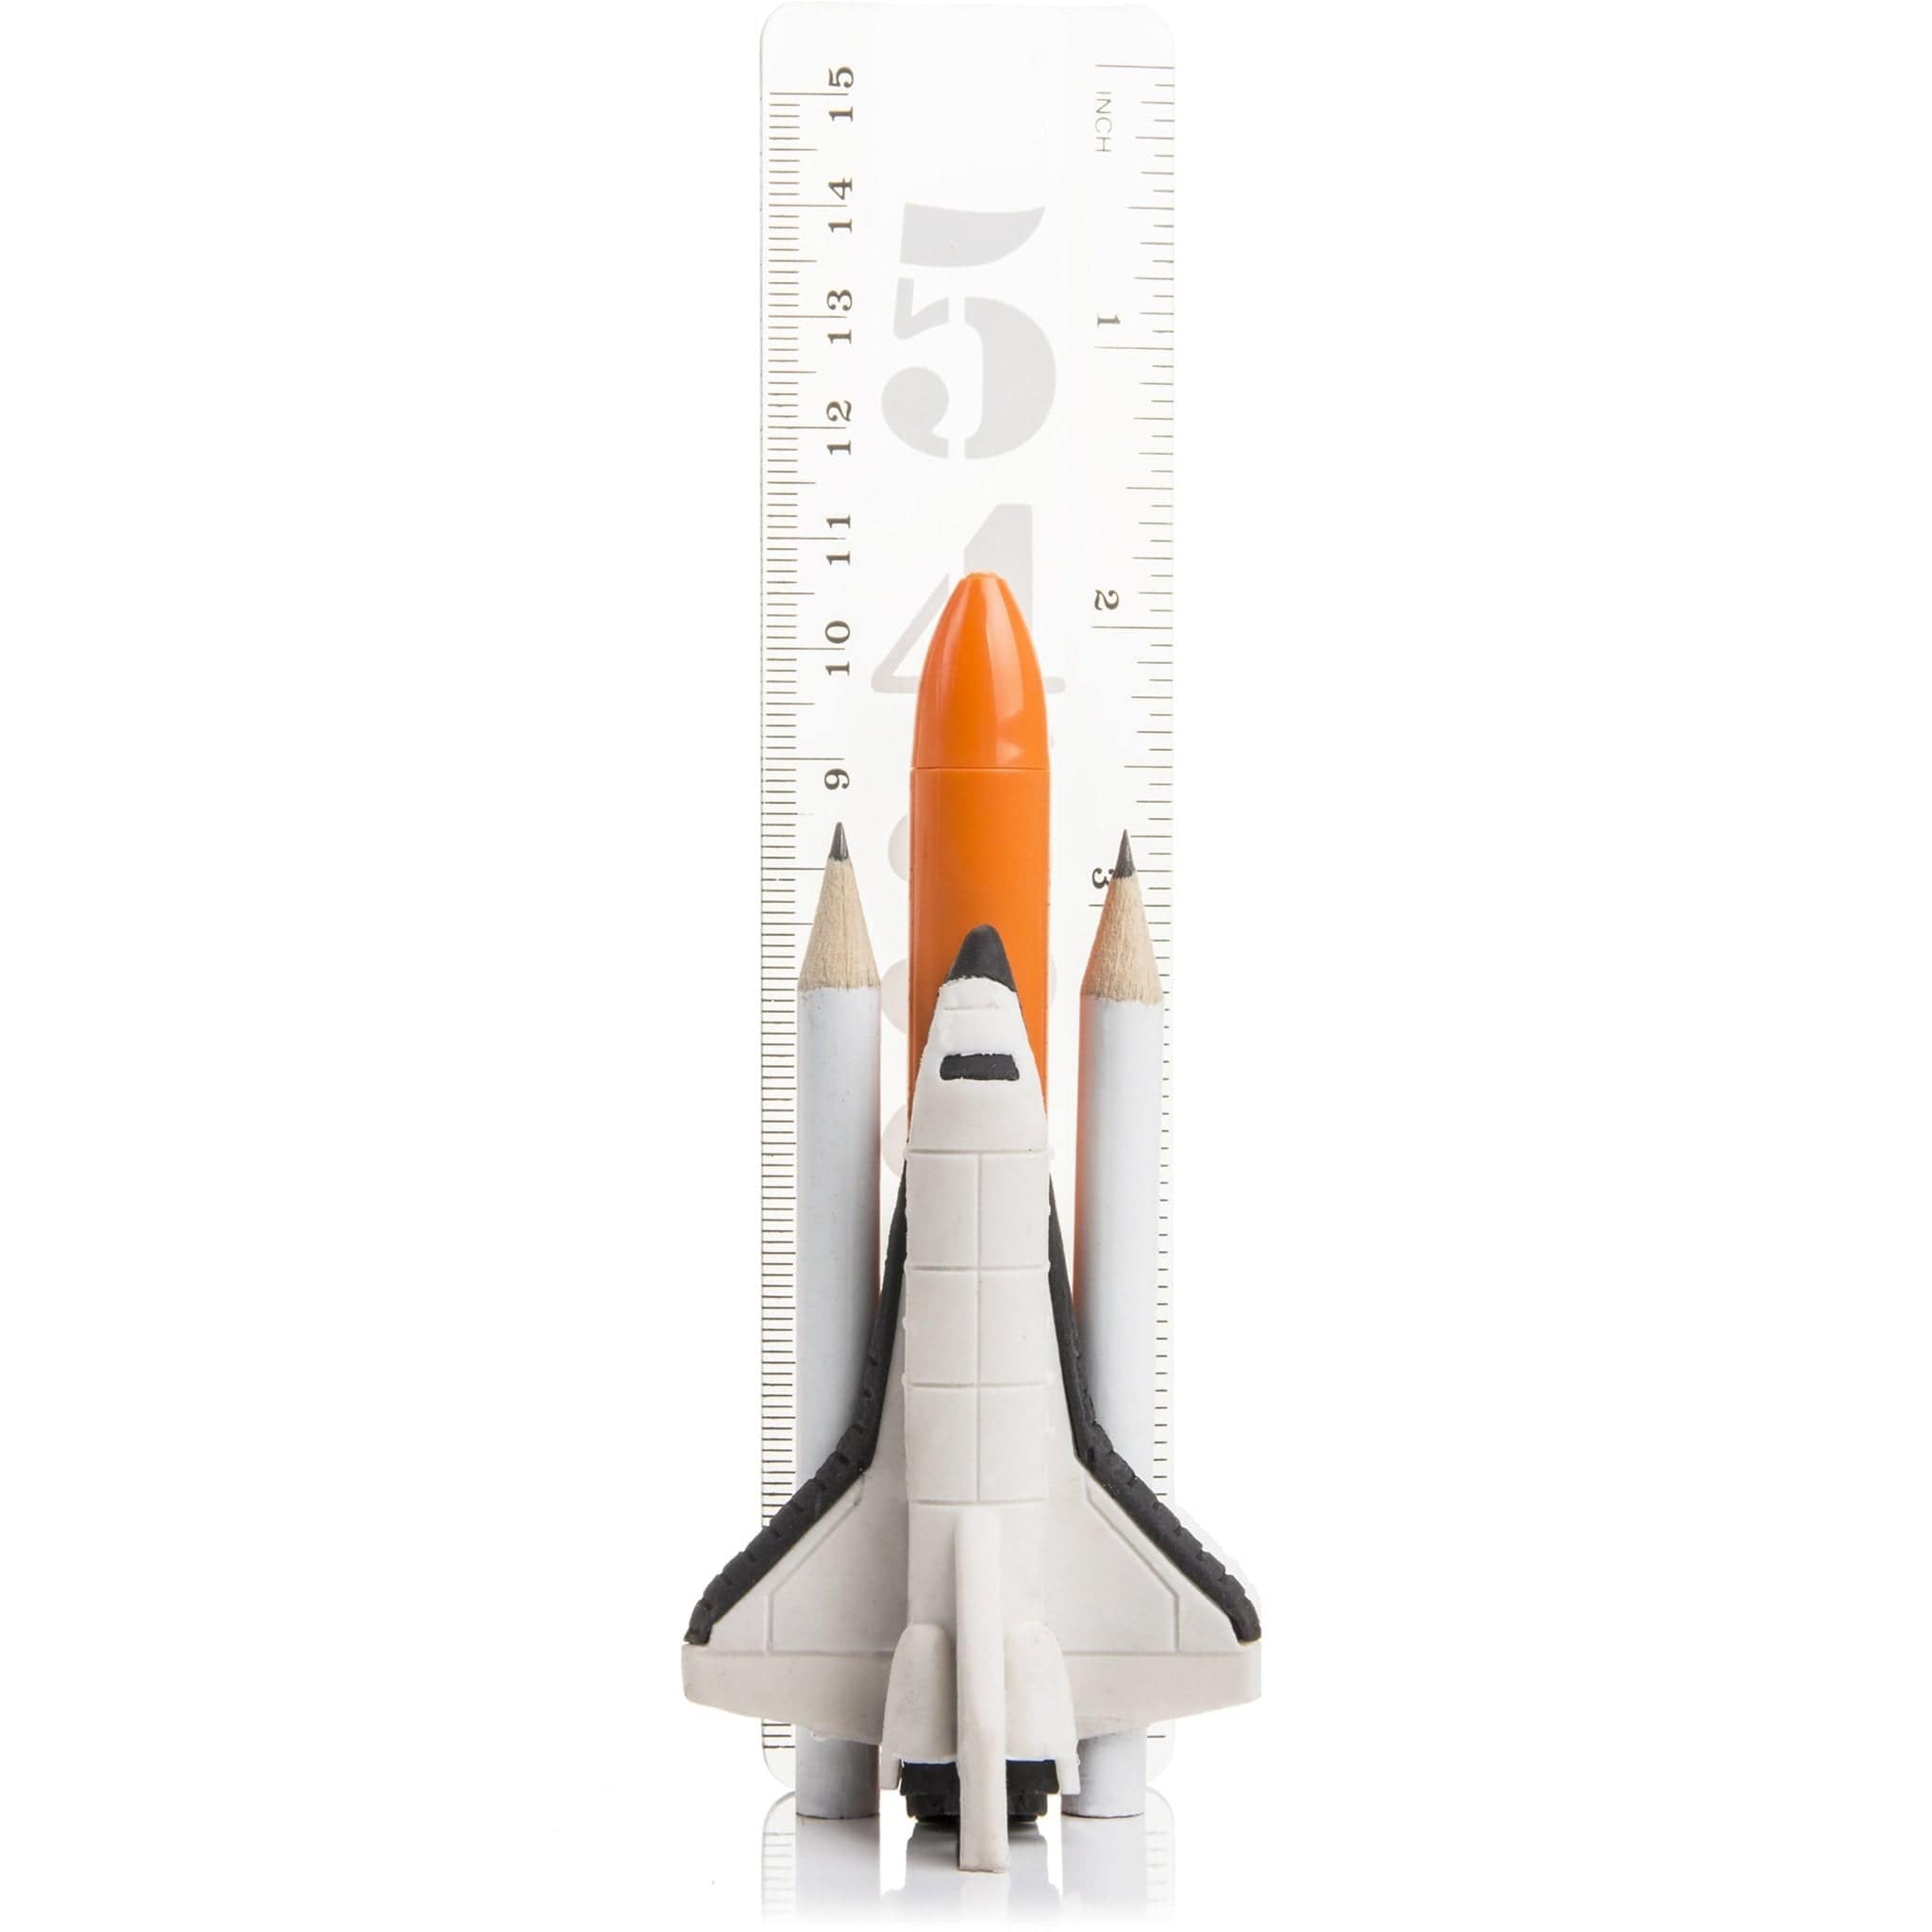 Space Shuttle Stationary Set